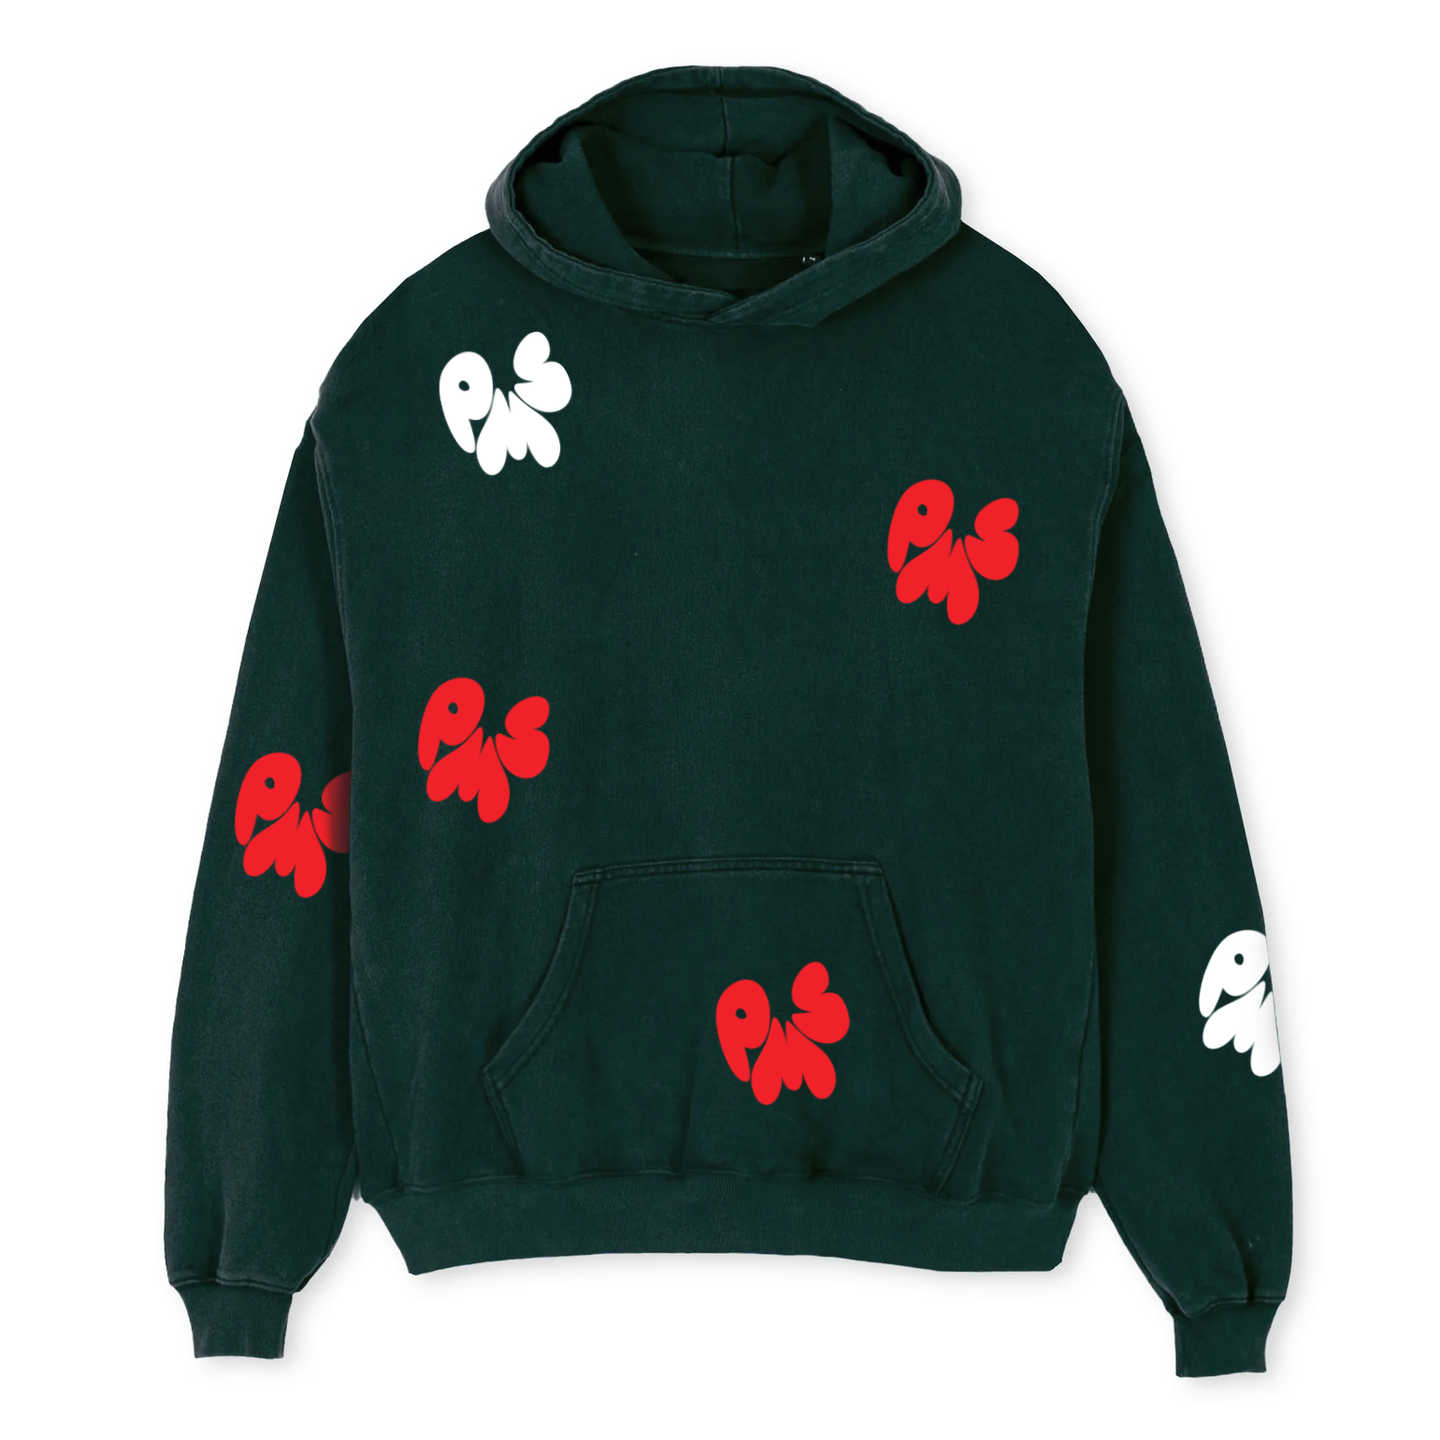 DARK GREEN OVERSIZED PMS HOODIE WITH RED AND WHITE CRINKLY PUFF LOGOS